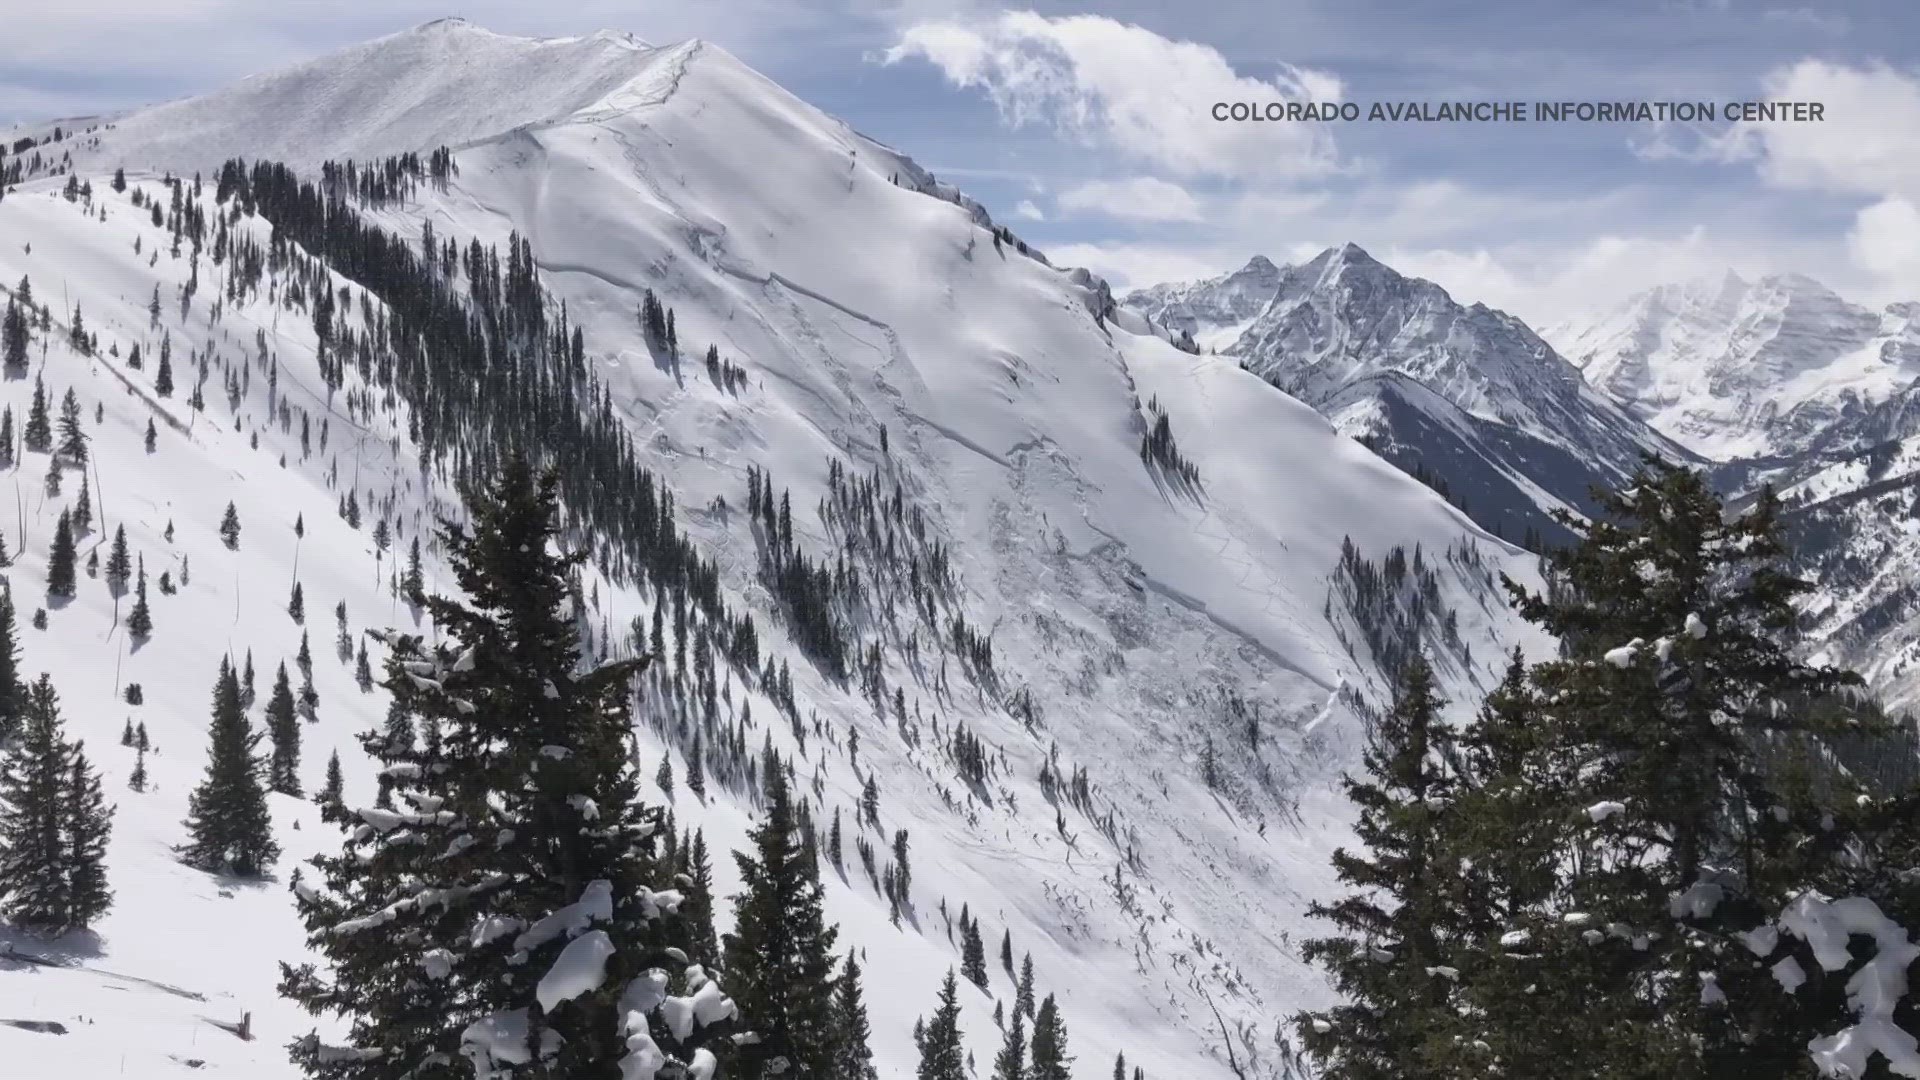 The avalanche happened in the Maroon Bowl area of Highland Peak, outside the ski area boundary of Aspen Highlands.